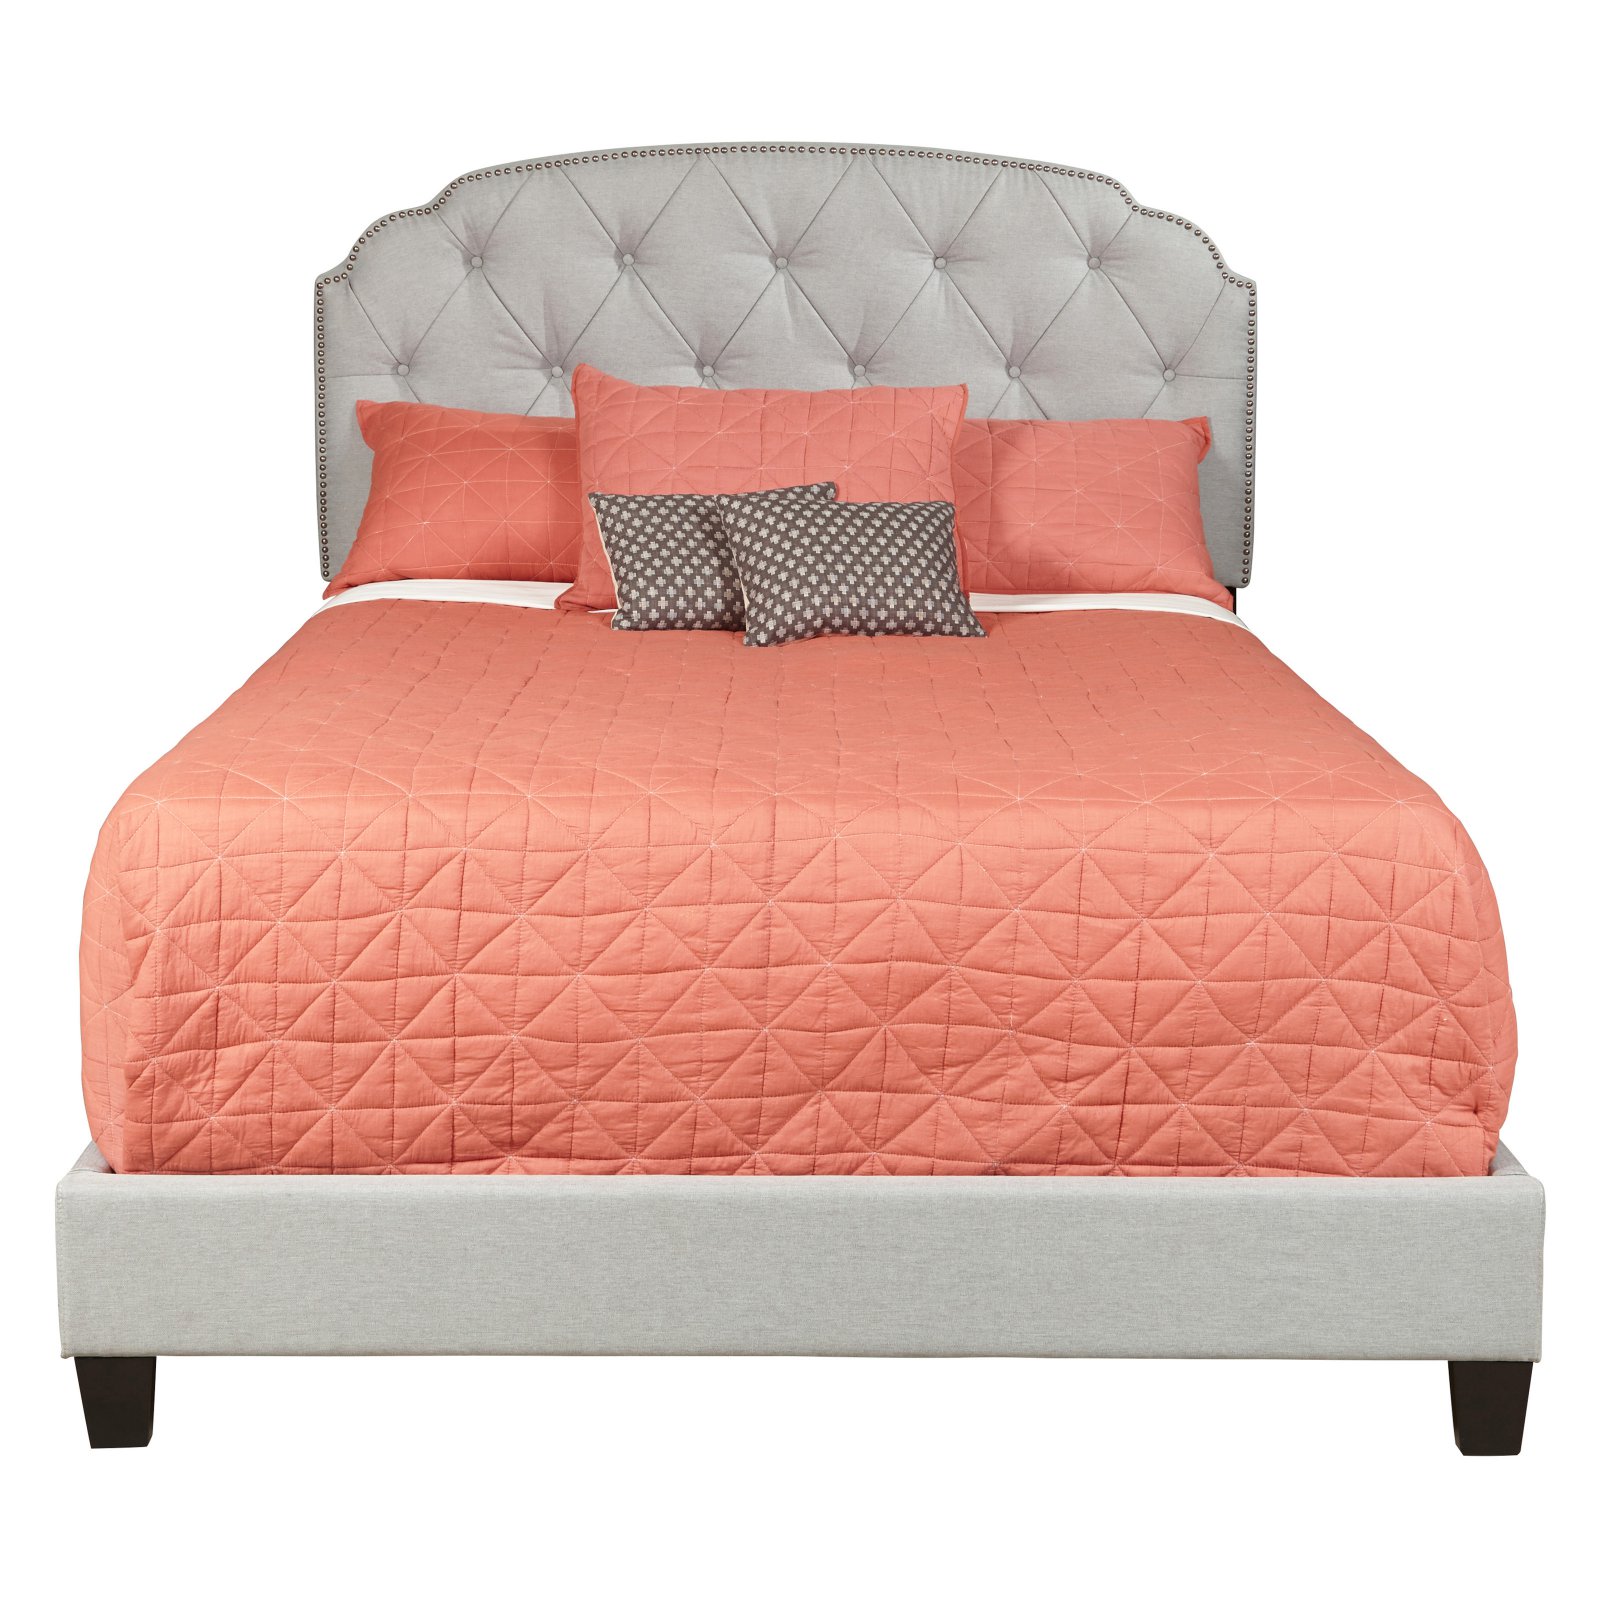 Trespass Marmor Tufted Nail Head Upholstered Bed - Queen - image 4 of 4